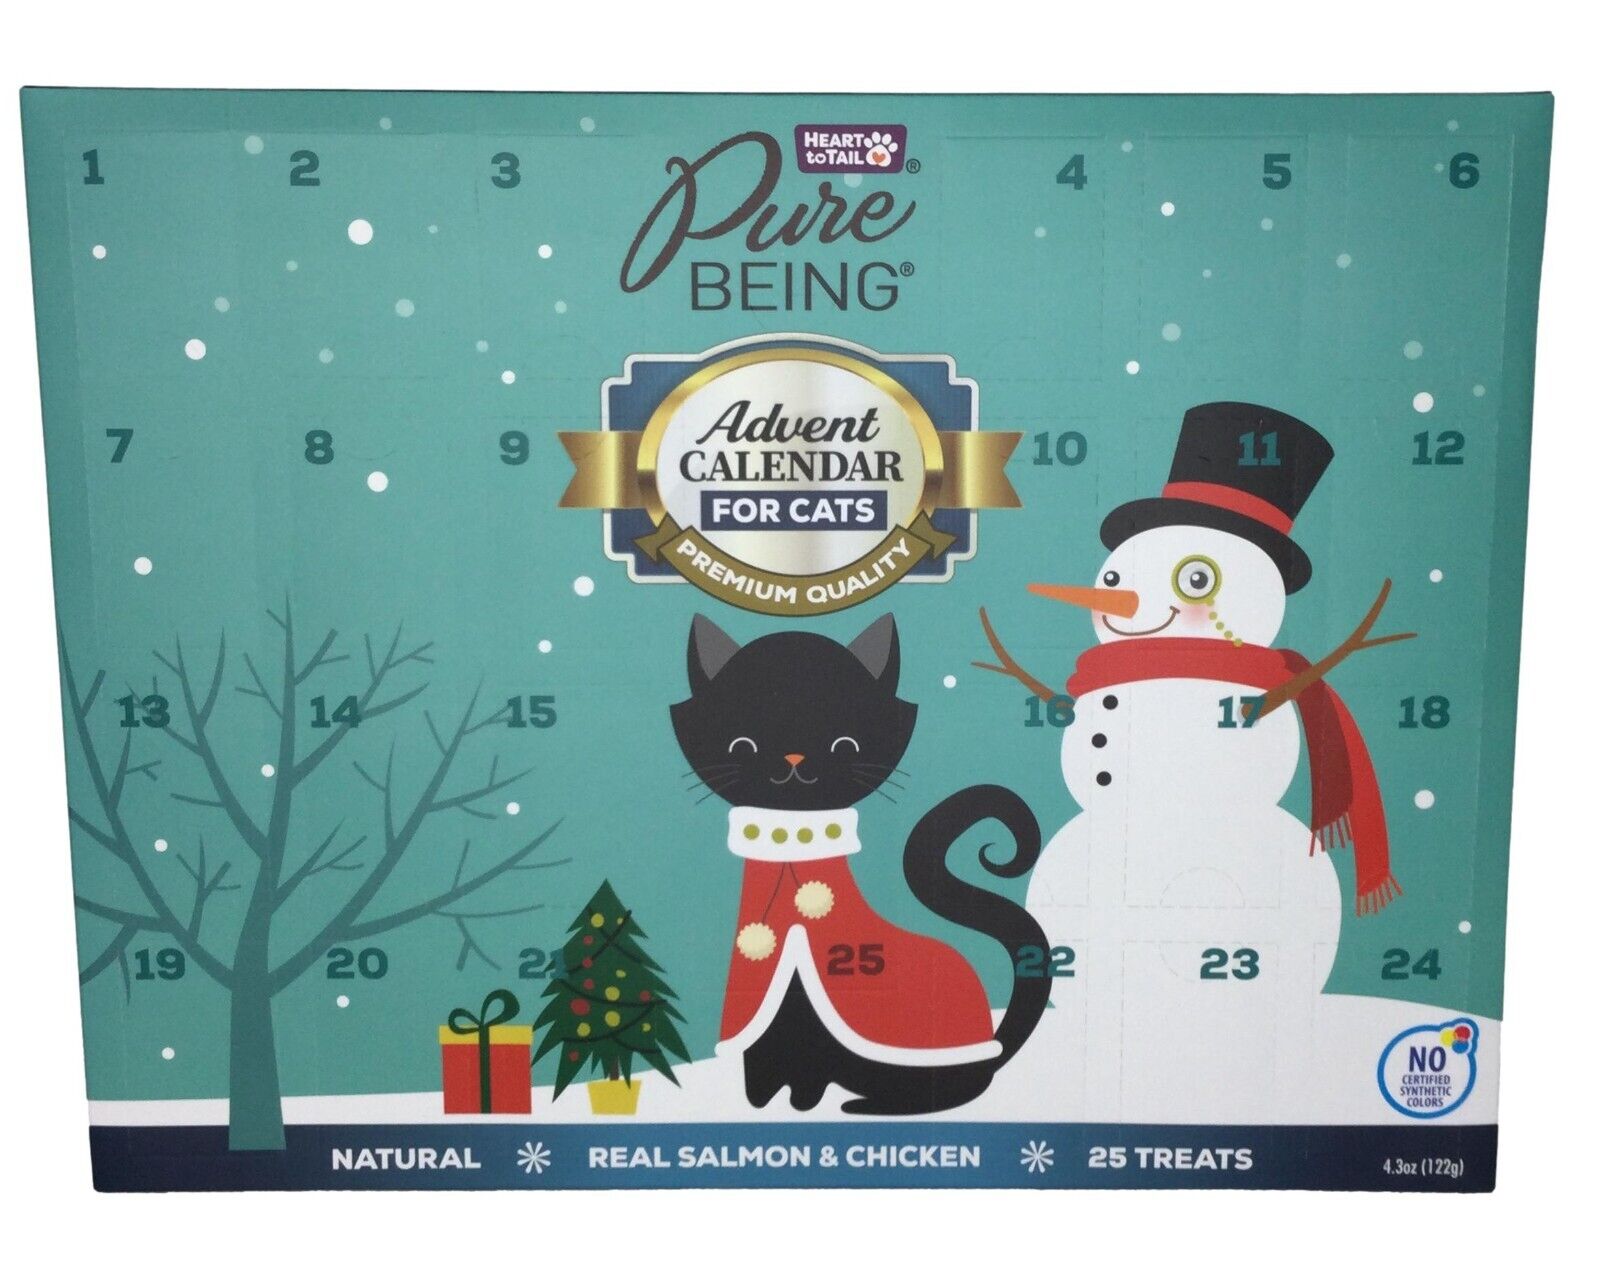 Advent Calendar for Cats 25 Days of Treats Premium Quality Pure Being expired 24